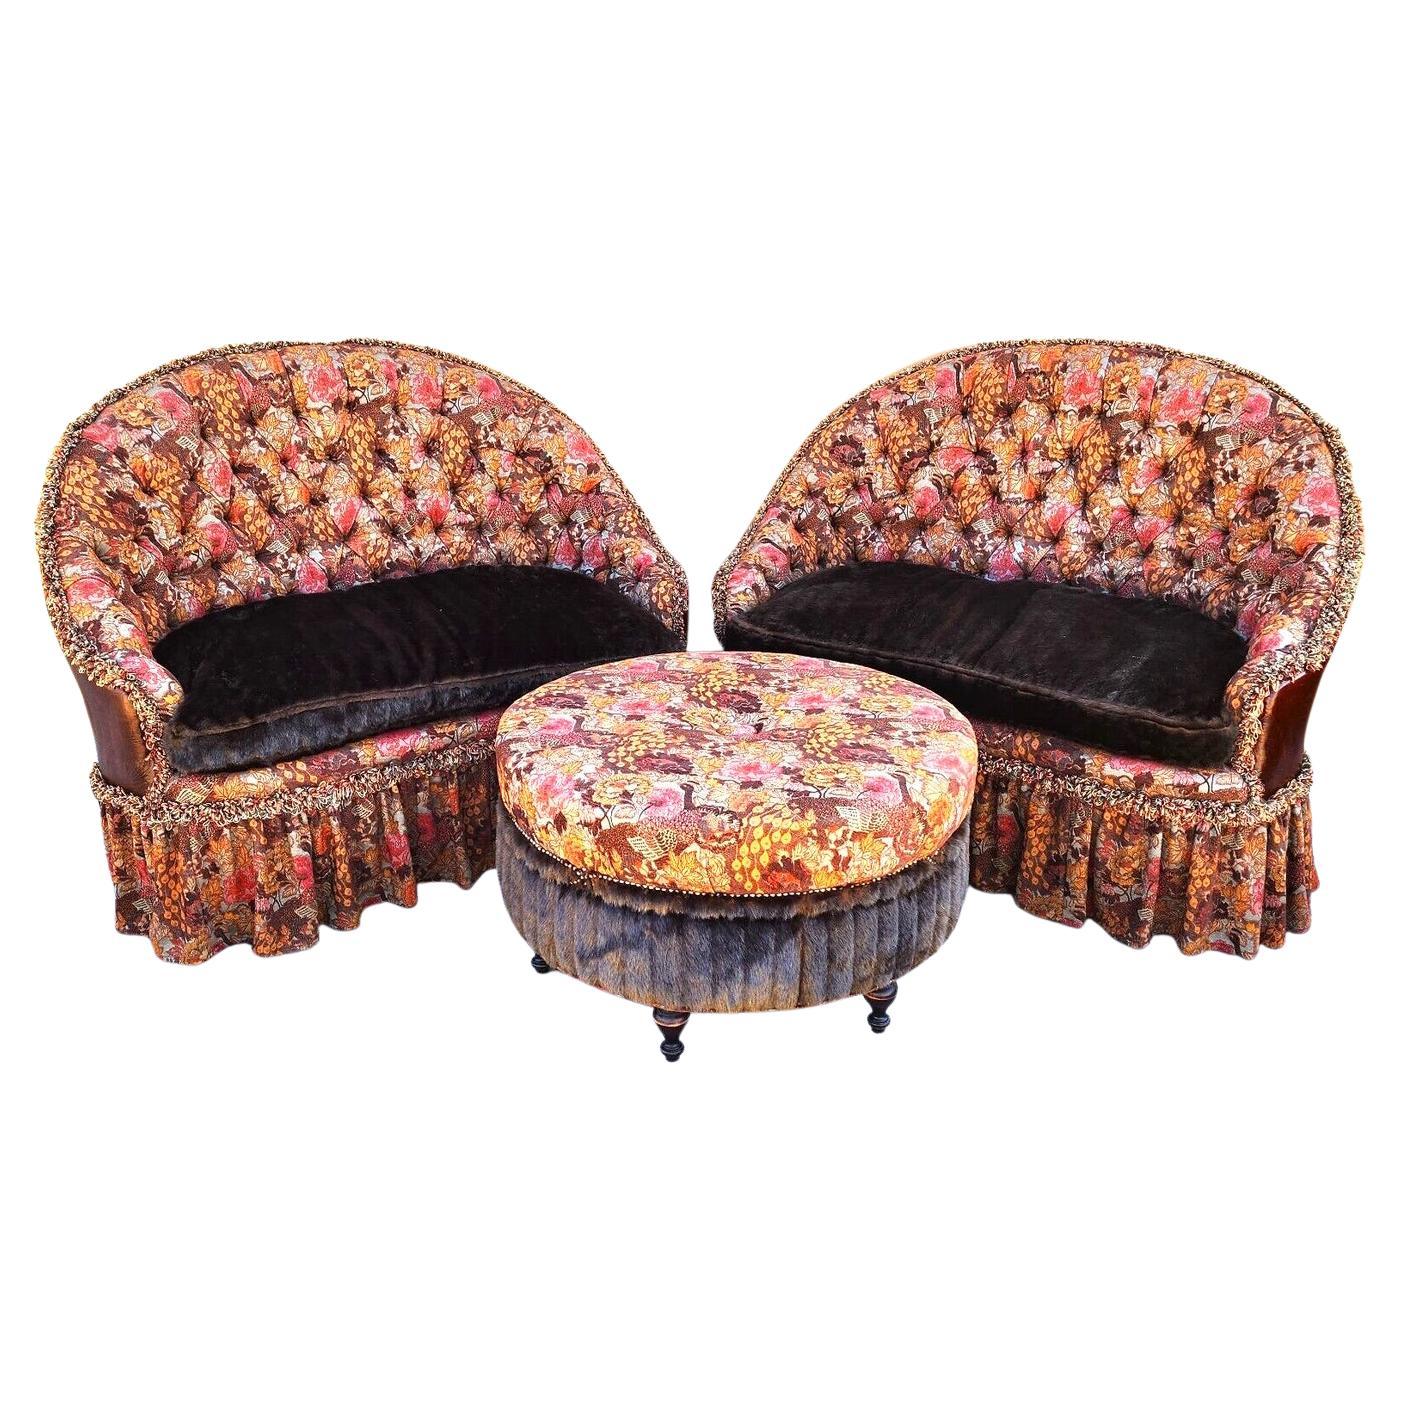 2 Settees & Ottoman Leather & Upholstered by Old Hickory Tannery 3 Piece Set For Sale